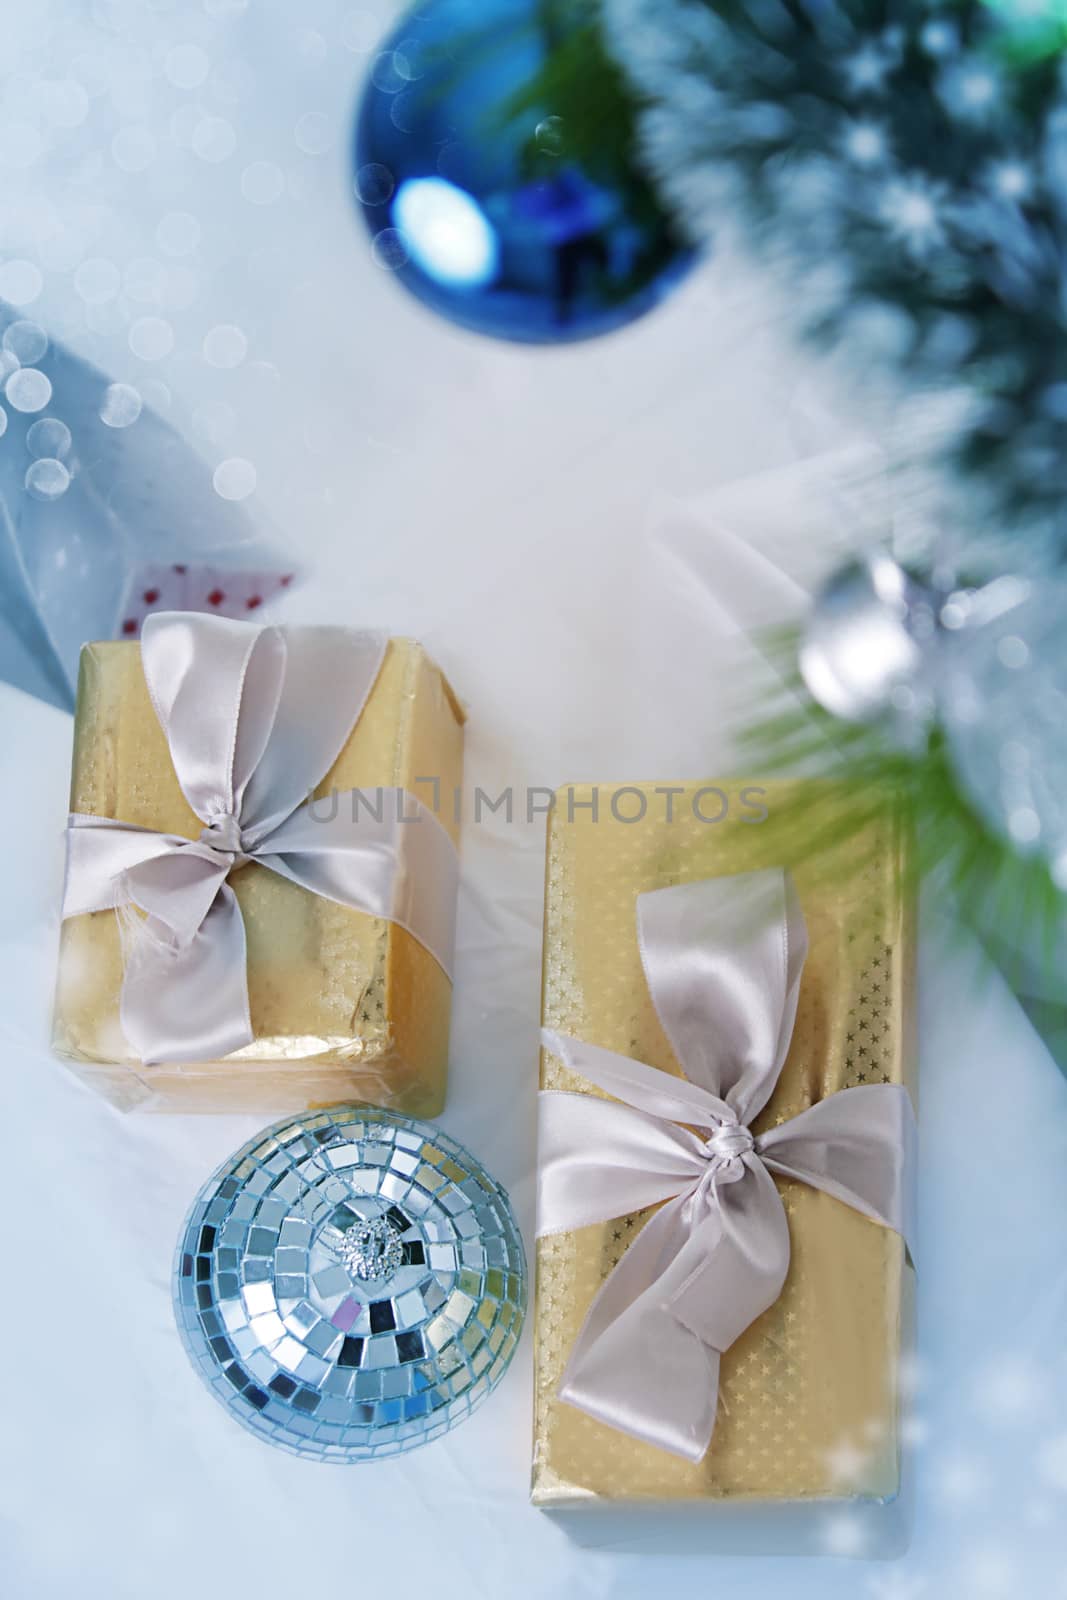 Christmas decor with blue balls and silver gifts